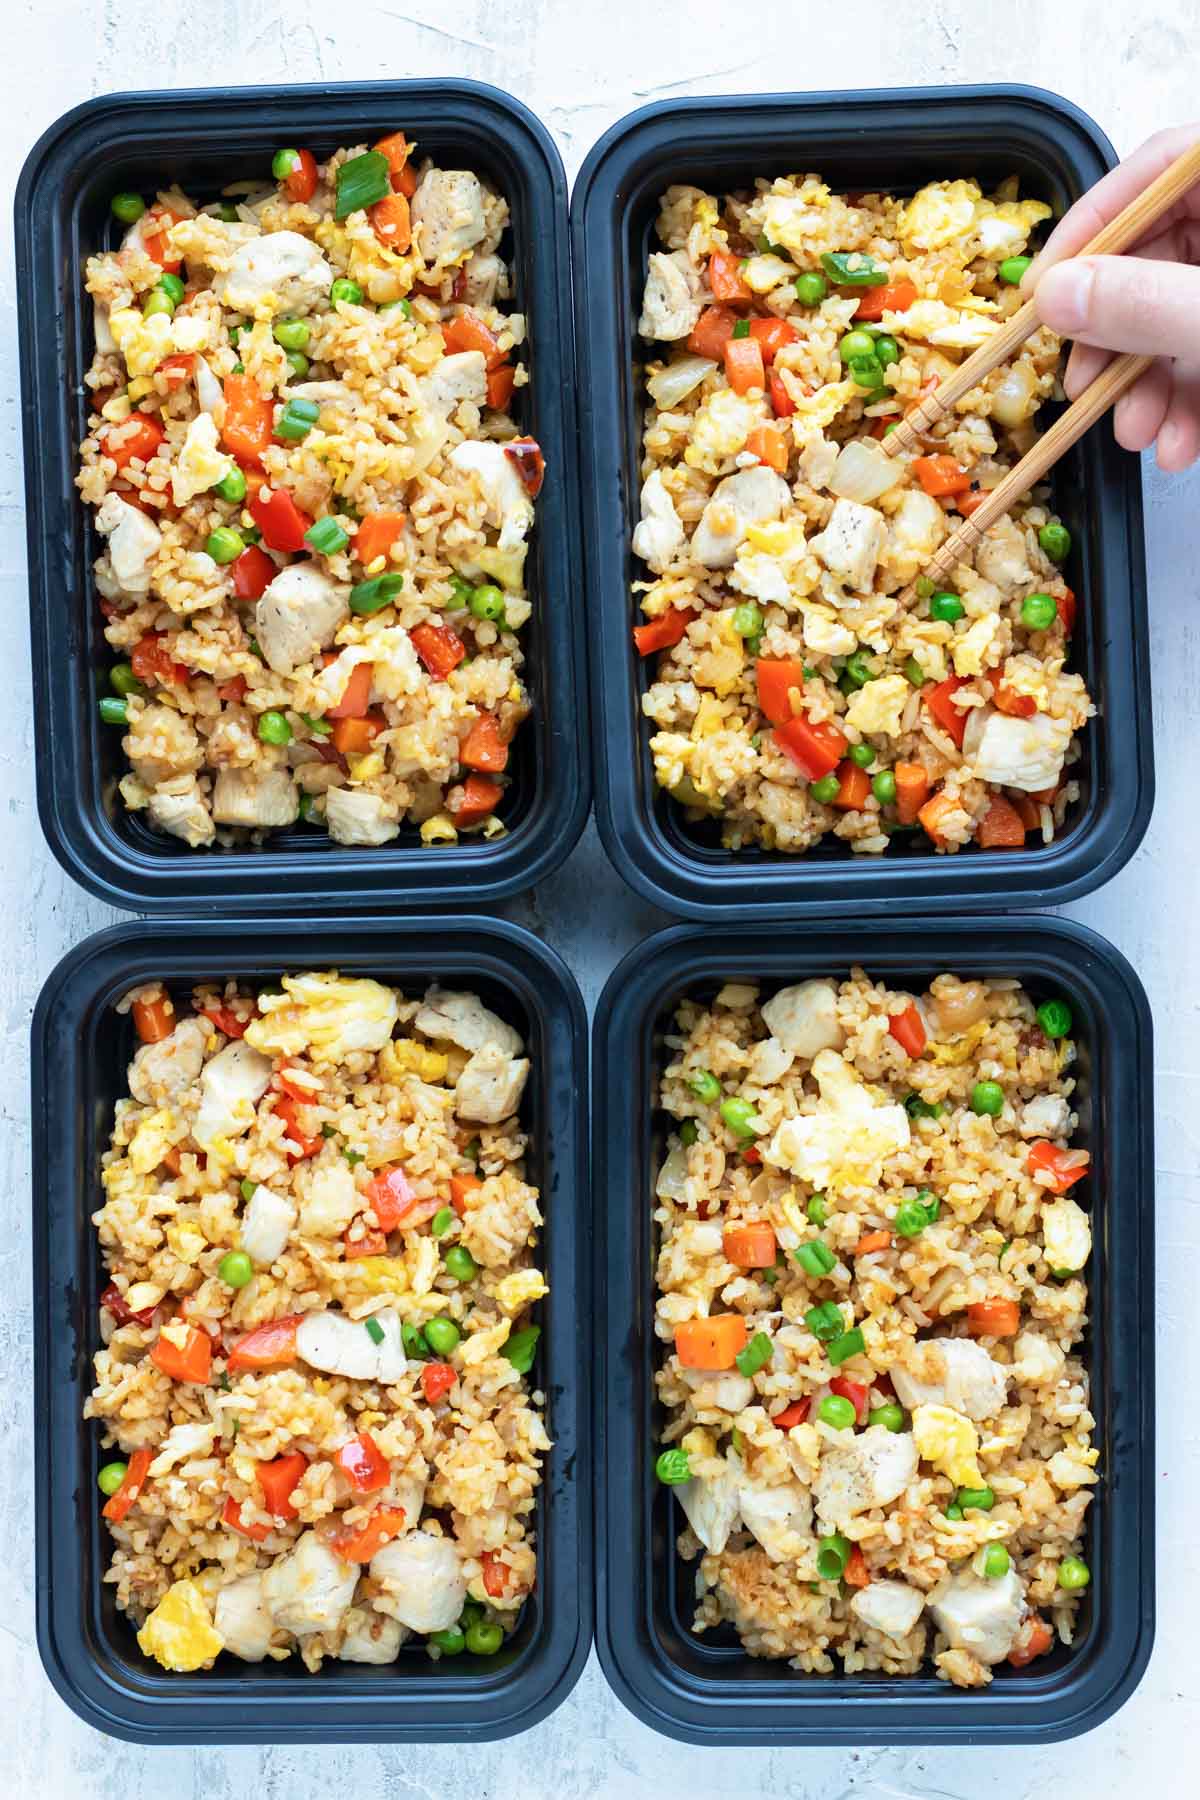 Meal prep containers full of chicken fried rice and a hand picking up some with chopsticks.